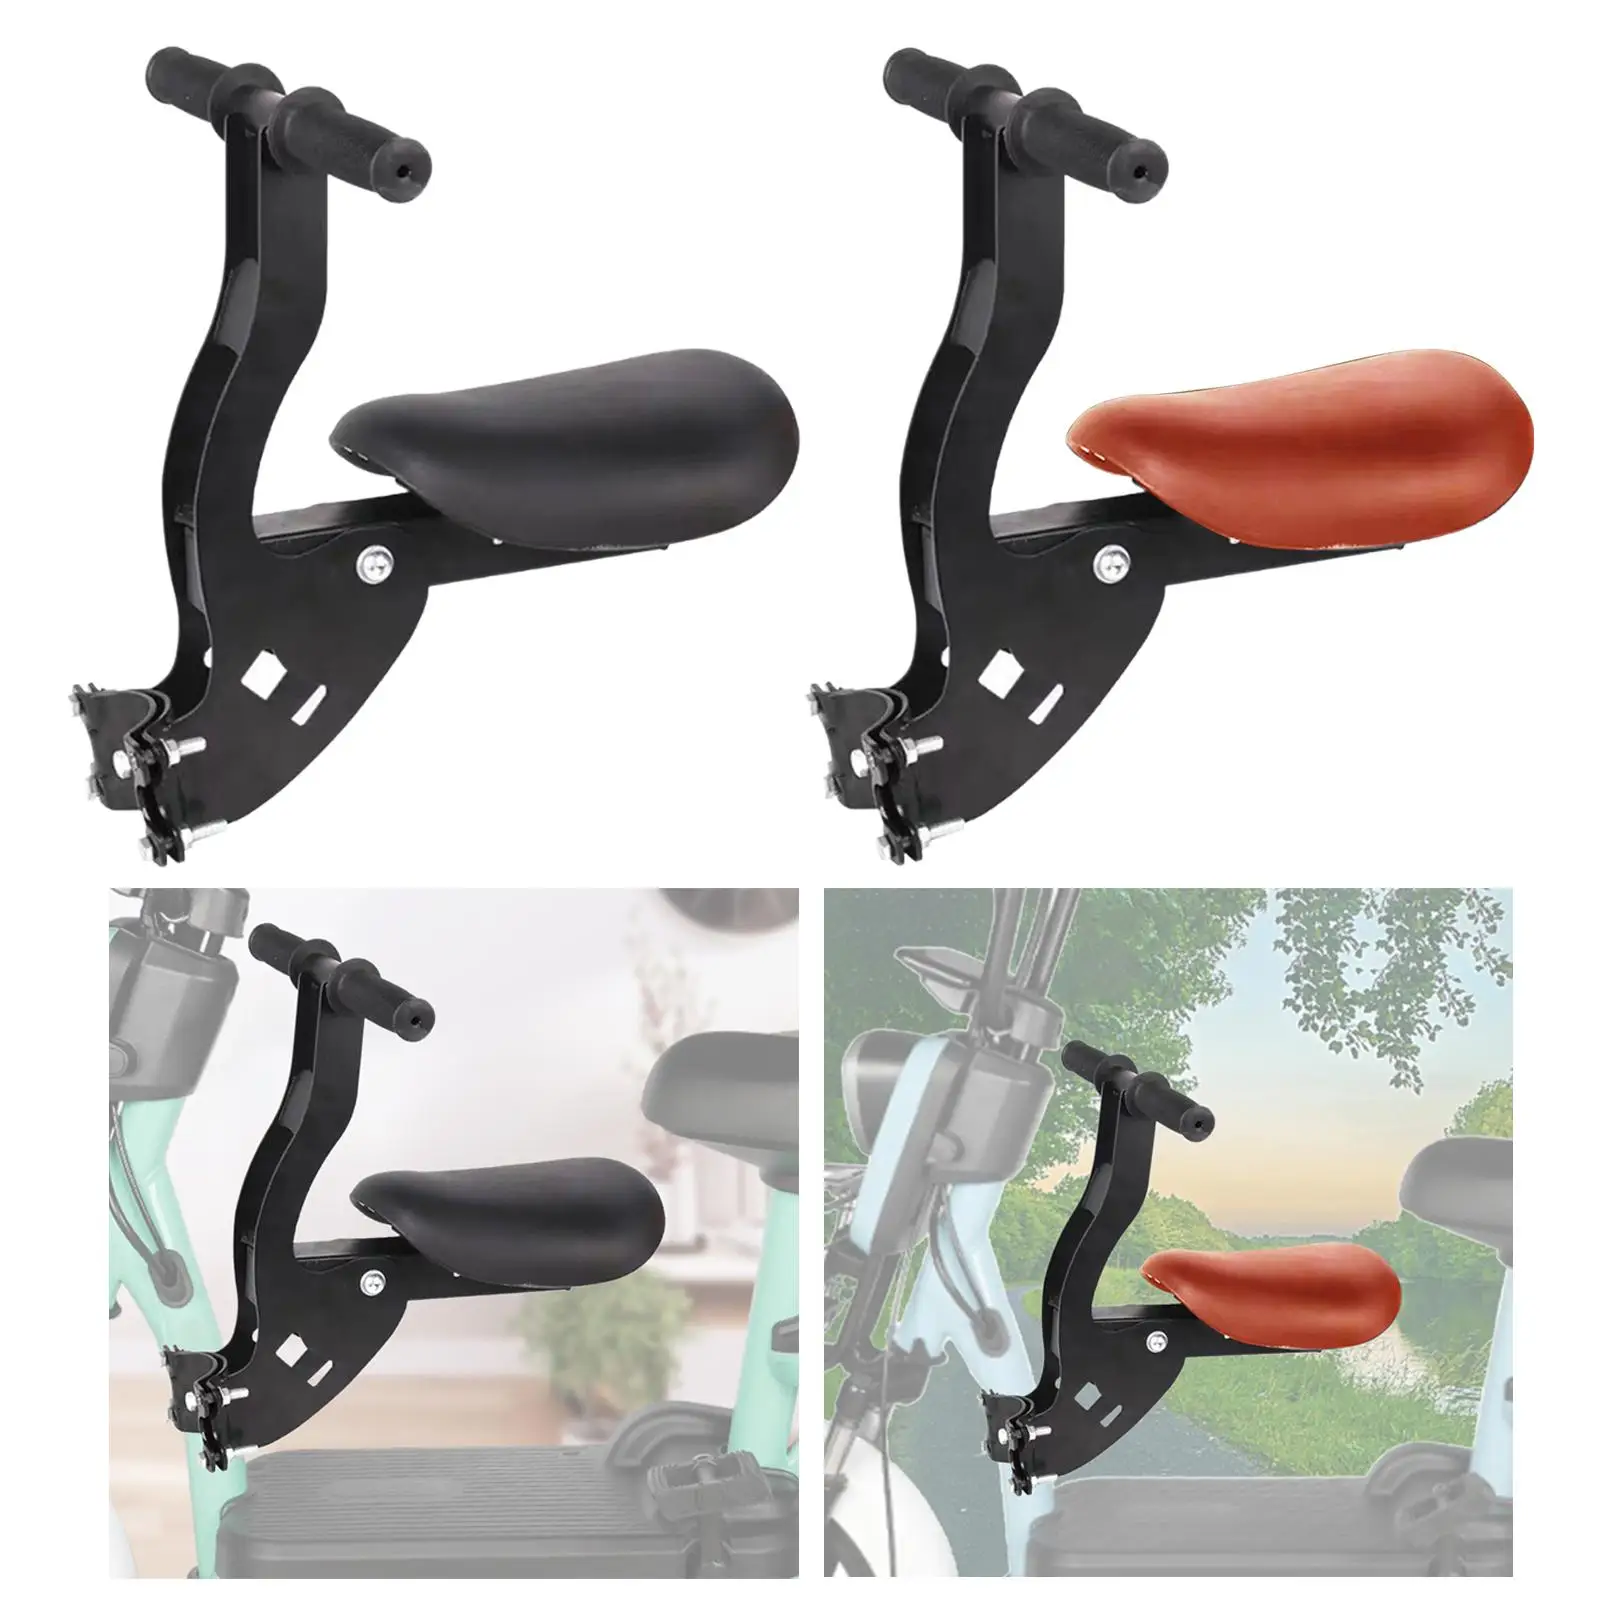 Kids Bike Seat Front Mounted Electromobile Baby Seat Bicycle Carrier Portable Universal for Mountain Bike Road Bikes